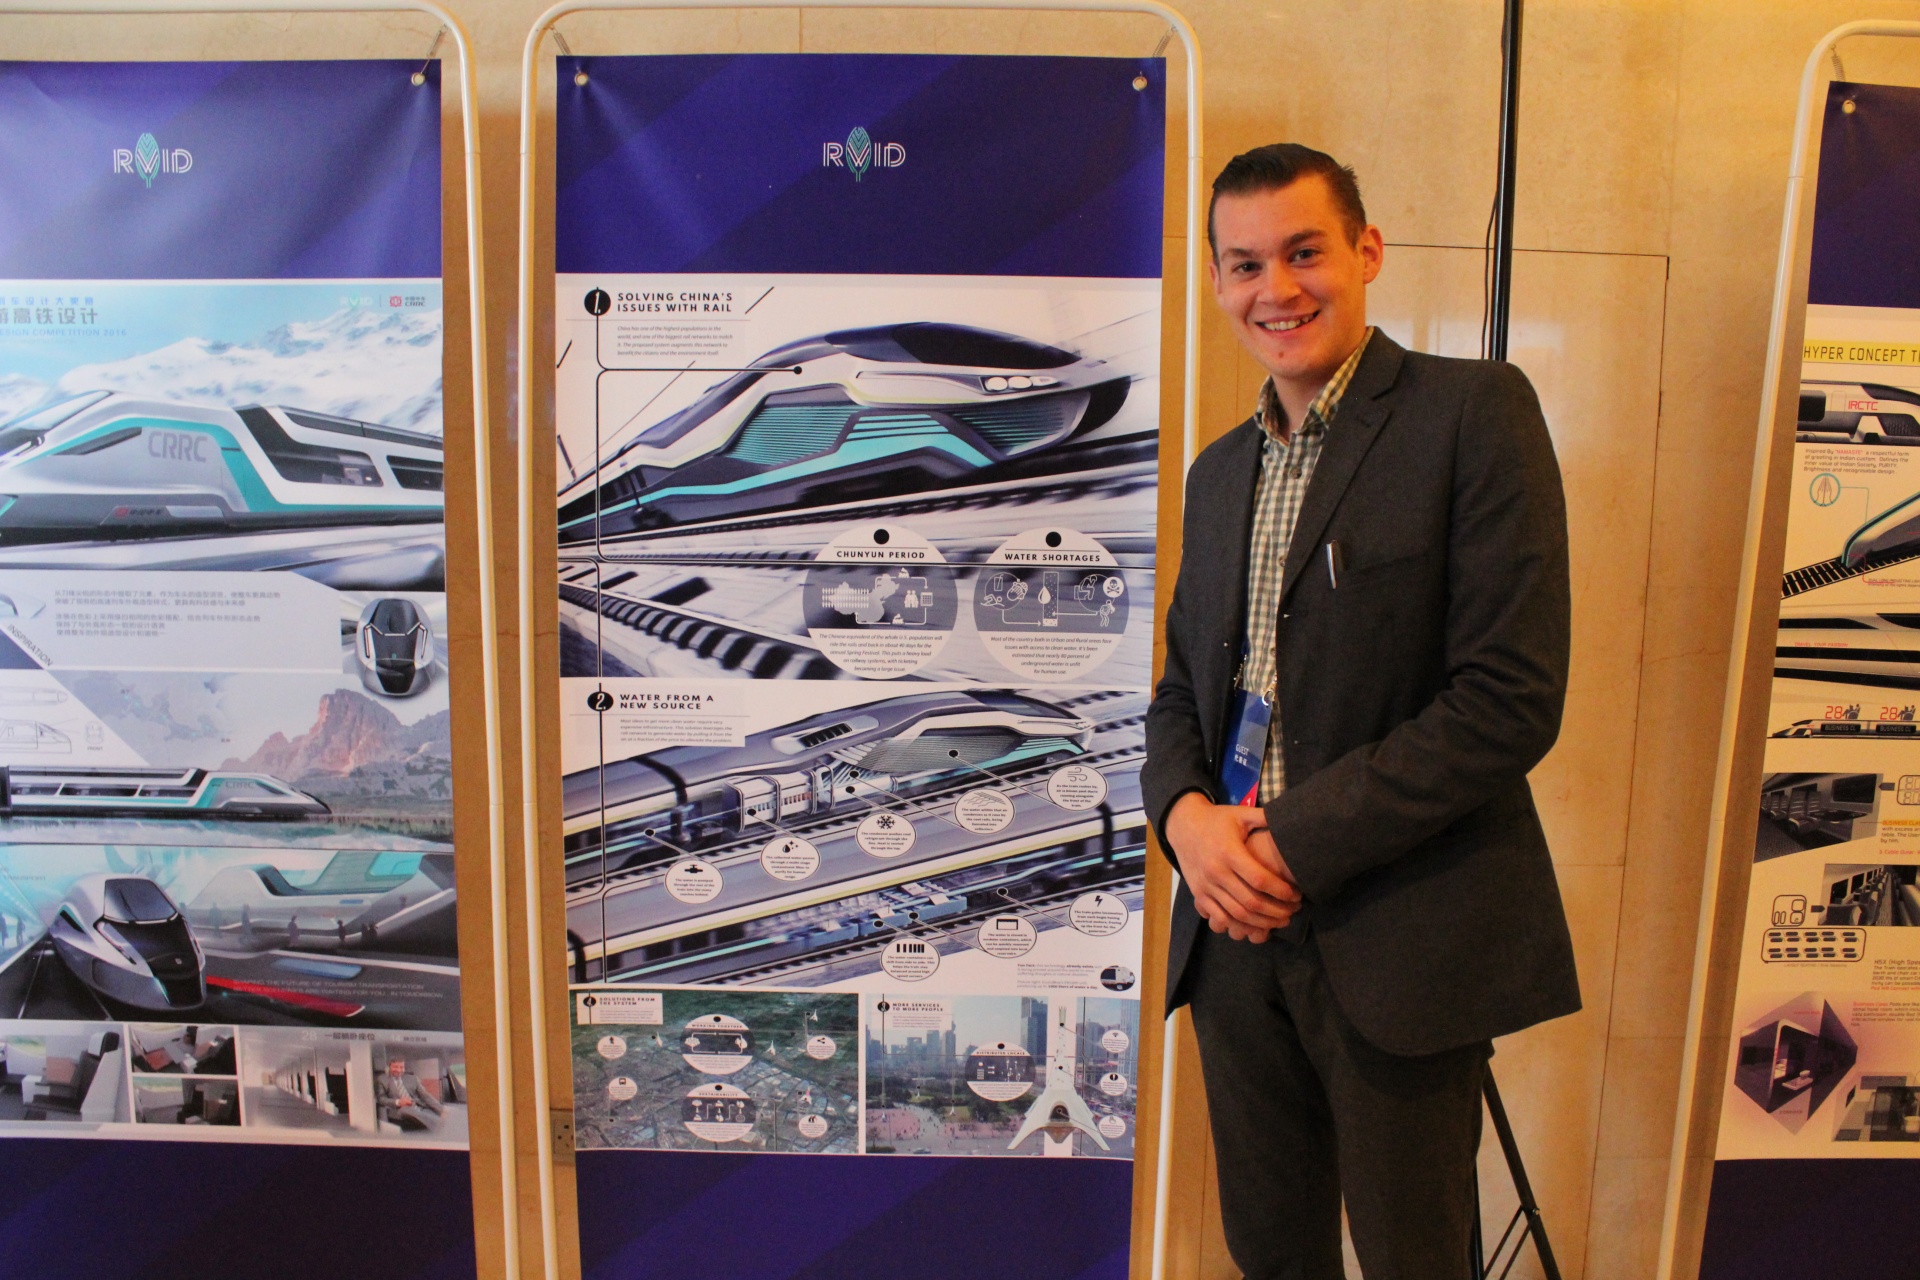 Chris with his design at the International Train Design Comp